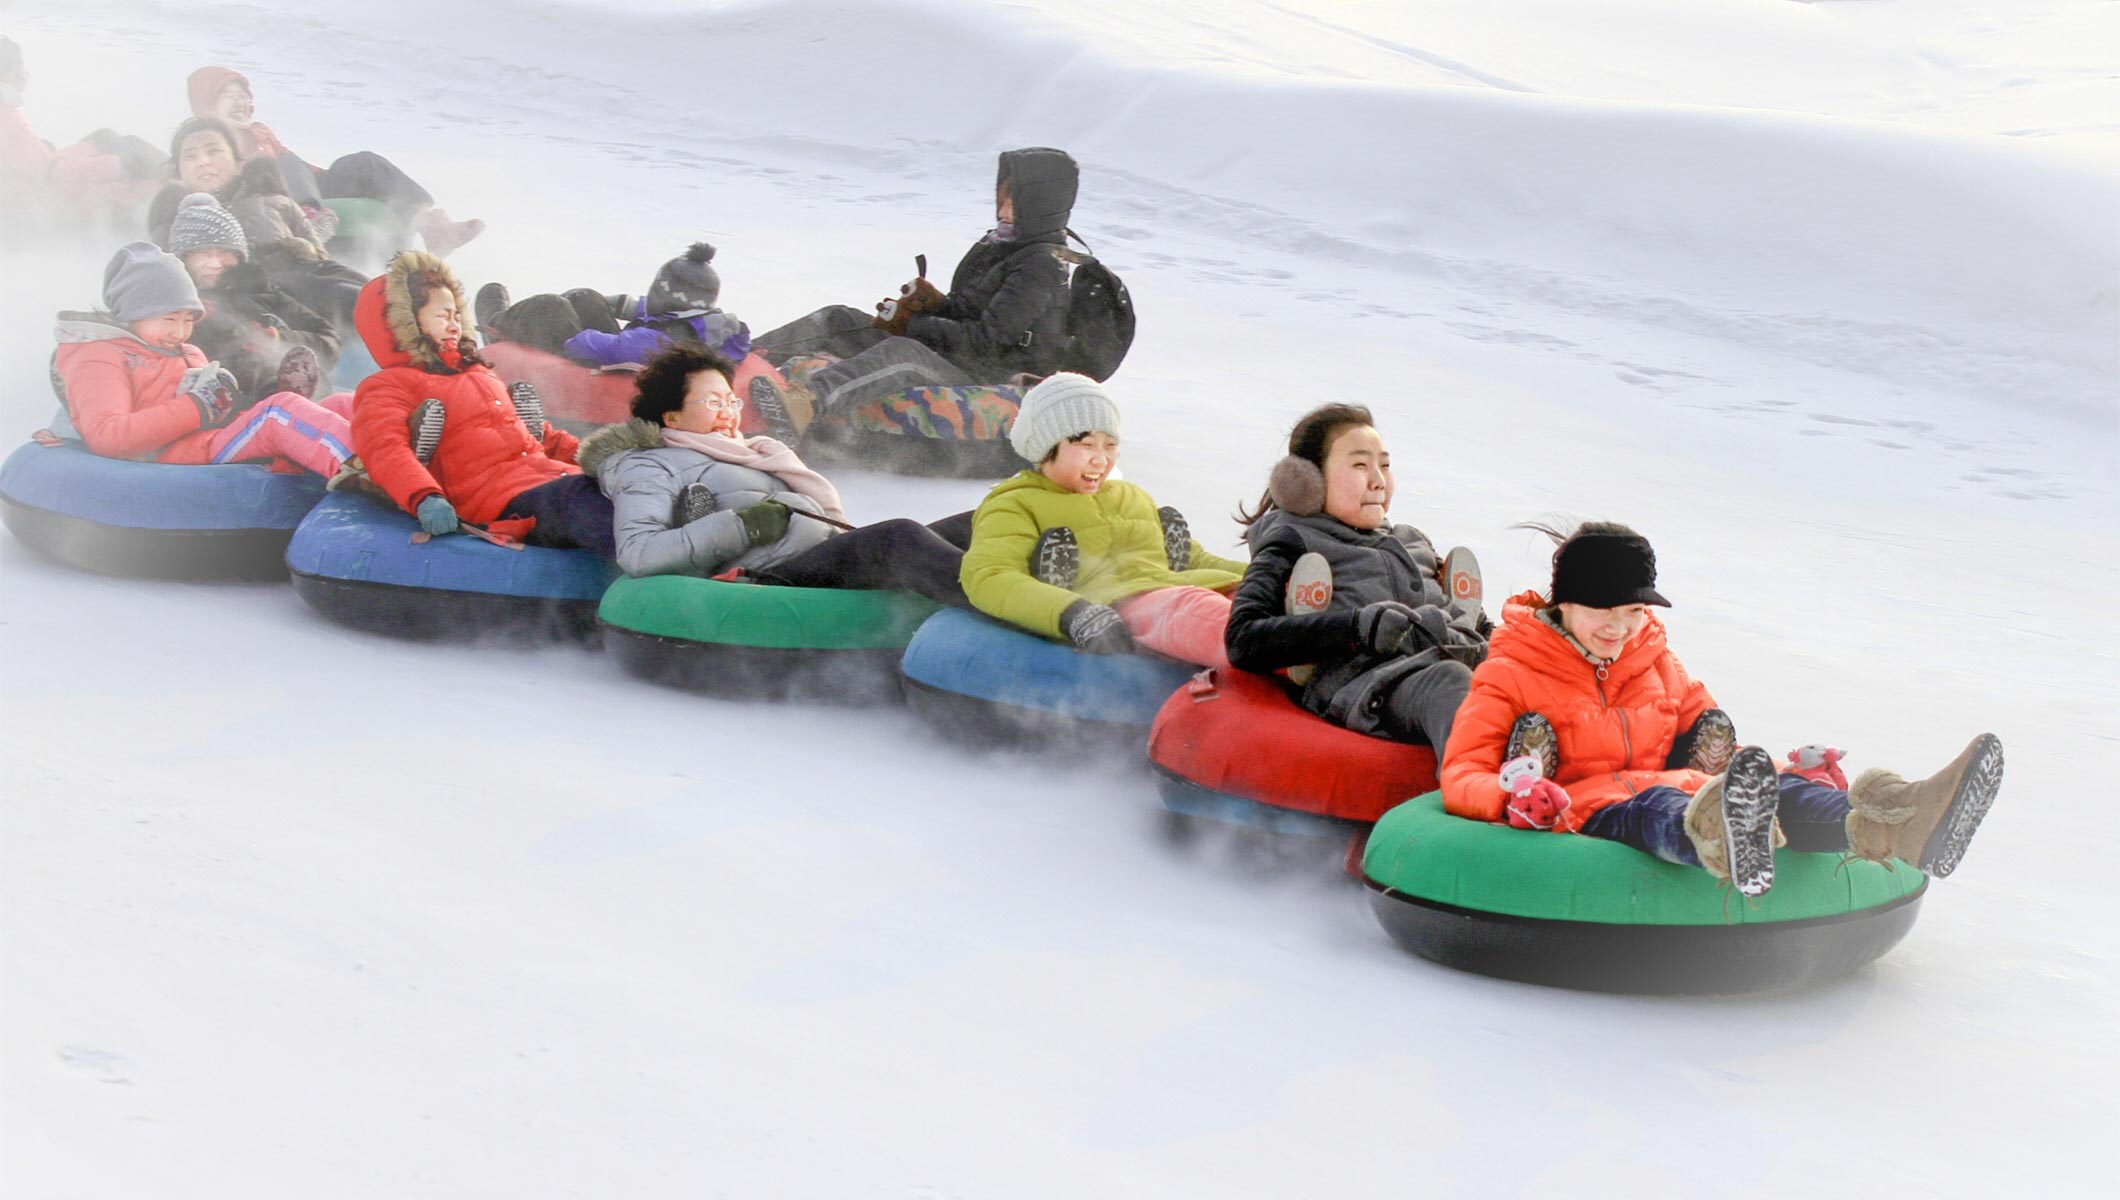 Chinese tourists participating in snow entertainment activities